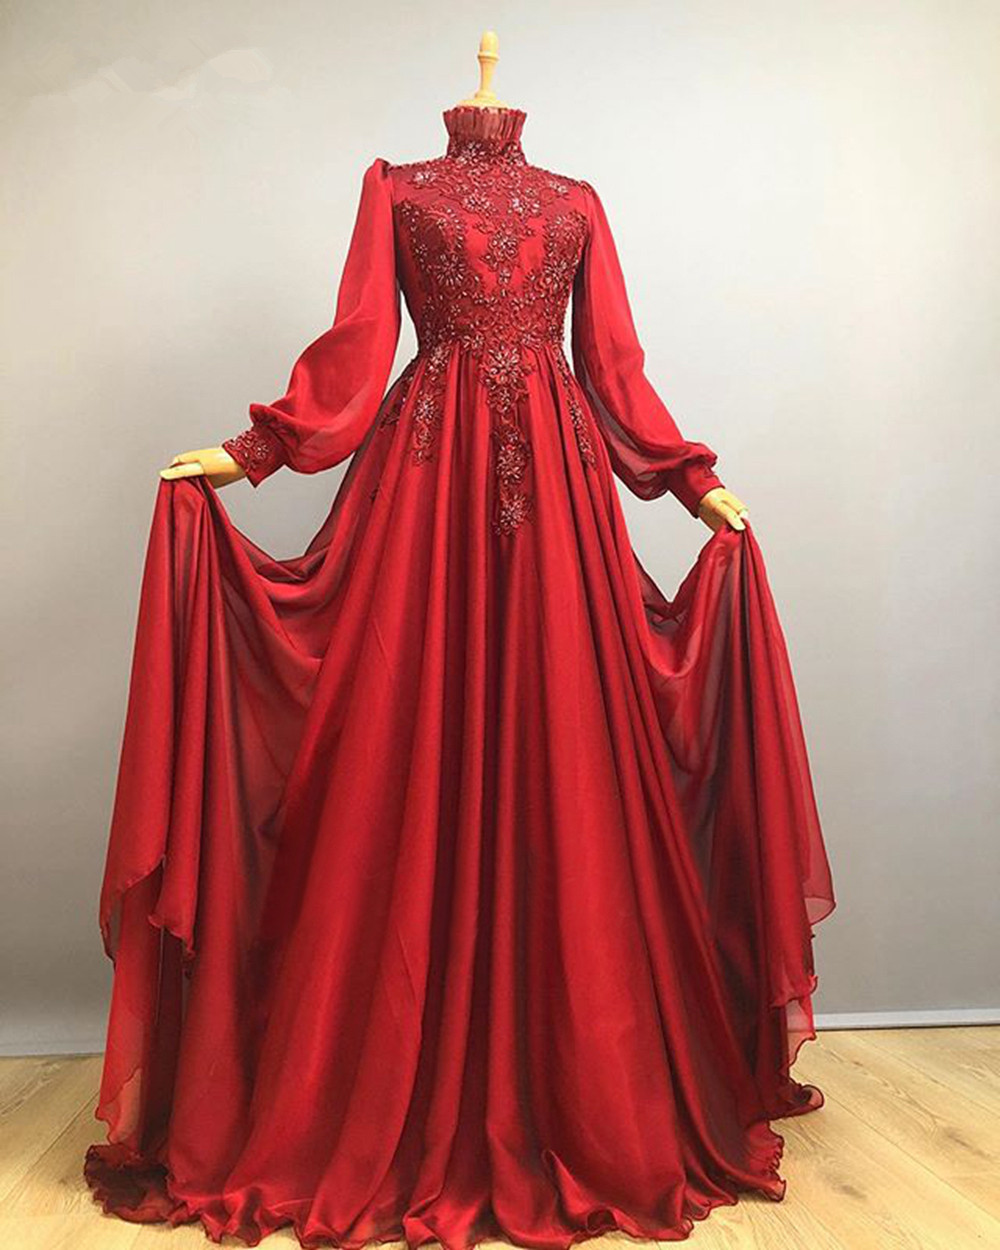 P3718 High Neck Red Muslim Women Evening Dresses With Long Sleeve Beaded Appliques High Neck Formal Dress Custom Made